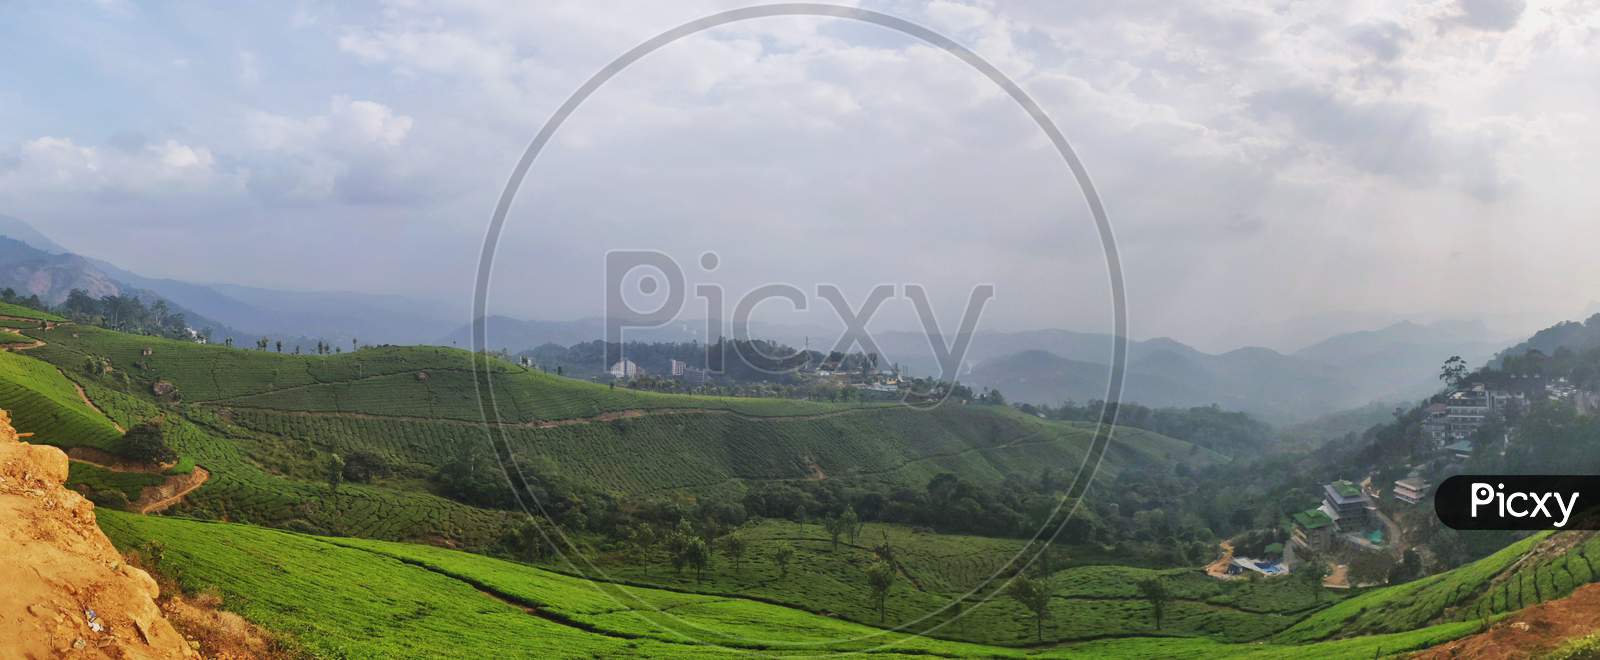 Panorama Of A Landscape Filled With Greenery (Tea Plantation) And Cloudy Sky In Munnar, Kerala, India.